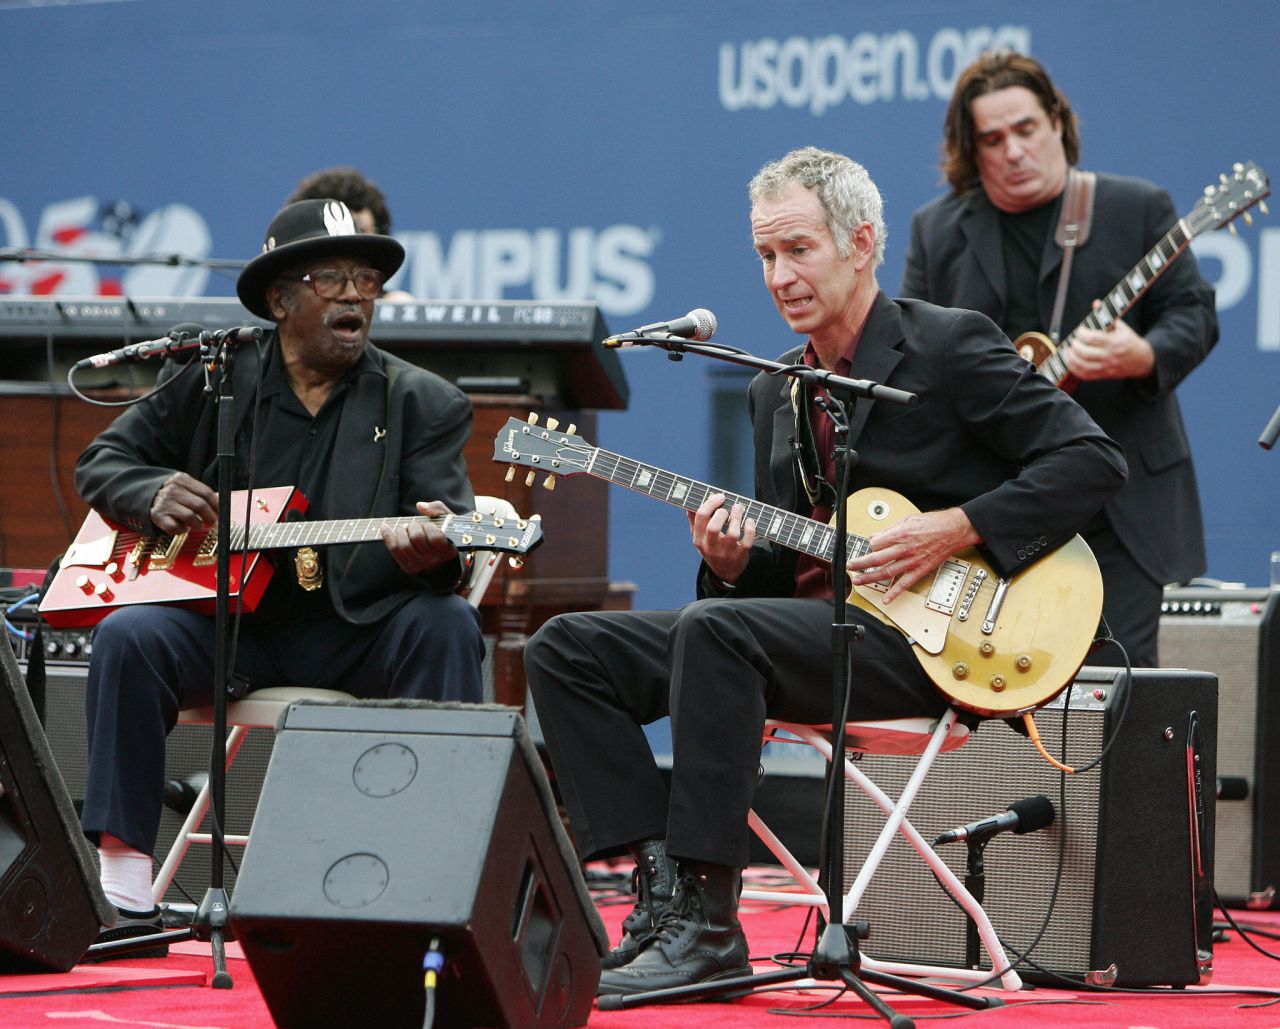 "American Pie." McEnroe is a keen musician, and is seen here performing with legendary guitarist Bo Diddley during  the U.S. Open in 2005. As well as Don McLean's 1970s classic, he's also a big fan of the Black Keys and Foo Fighters.